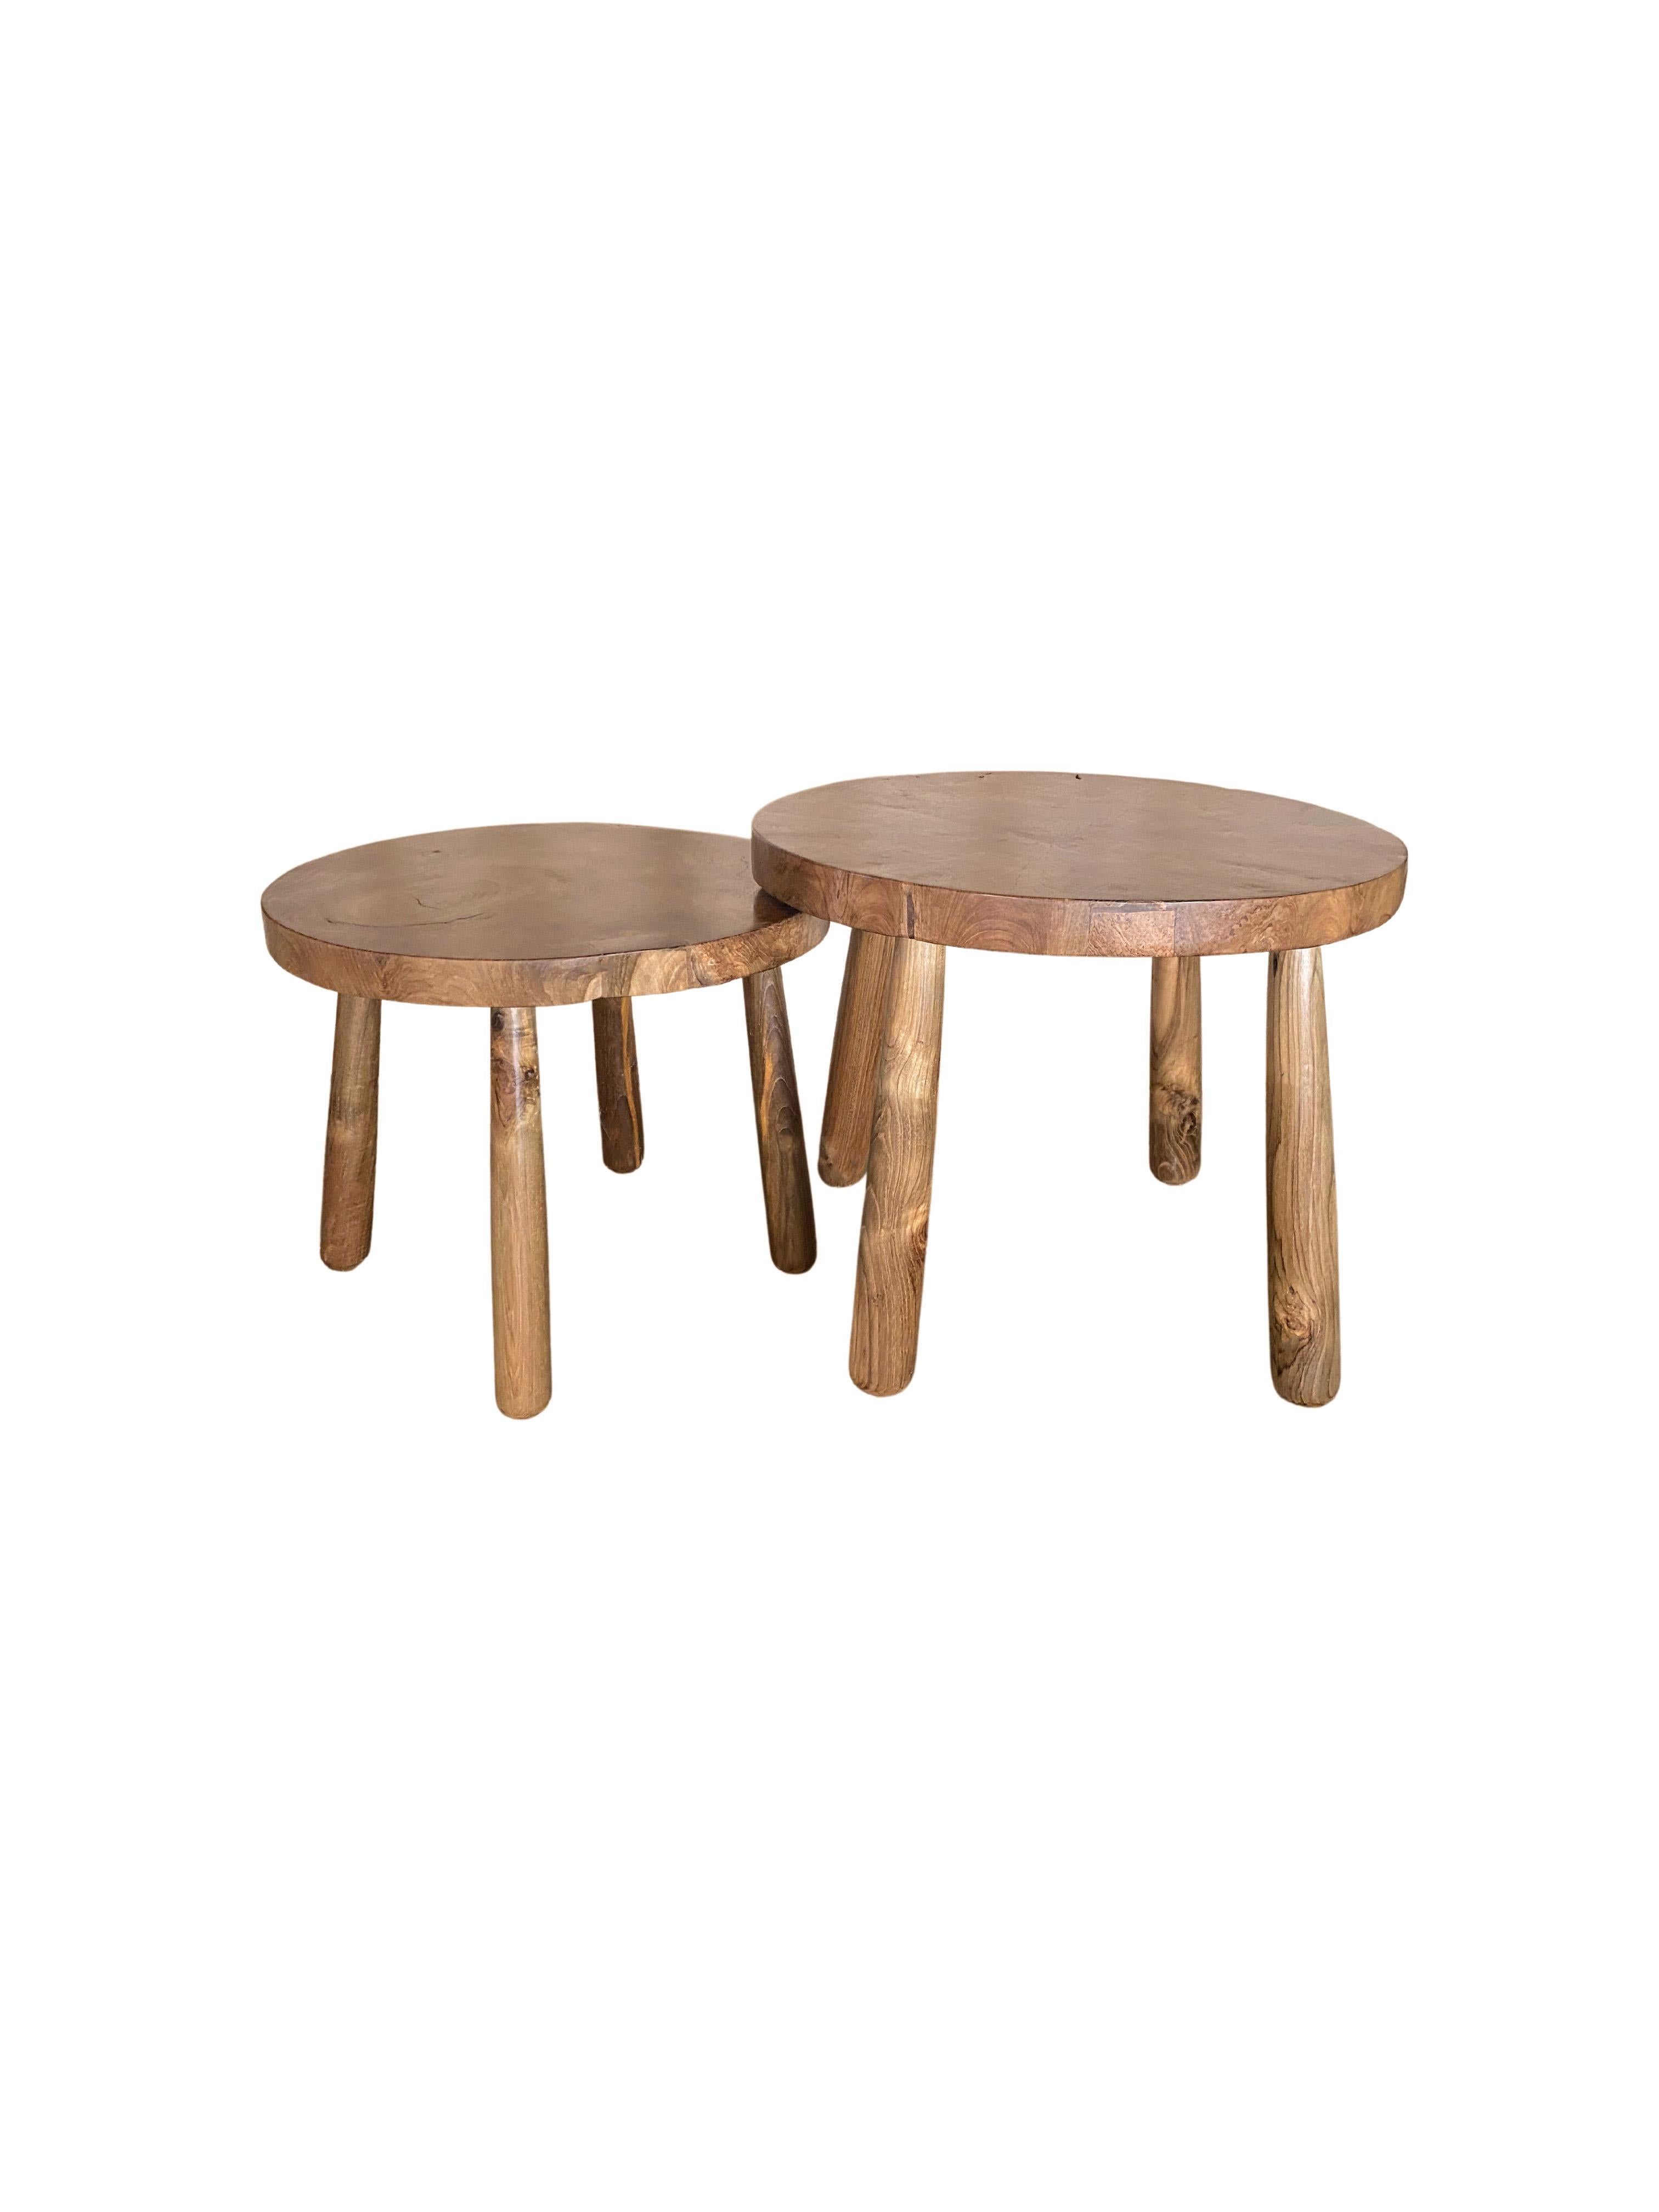 A set of sculptural teak wood side tables which feature an incredible teak burl wood patterning on their table tops. Carved from a single block of wood to find teak patterning as intricate as these is hard to come by. The tables feature four curved